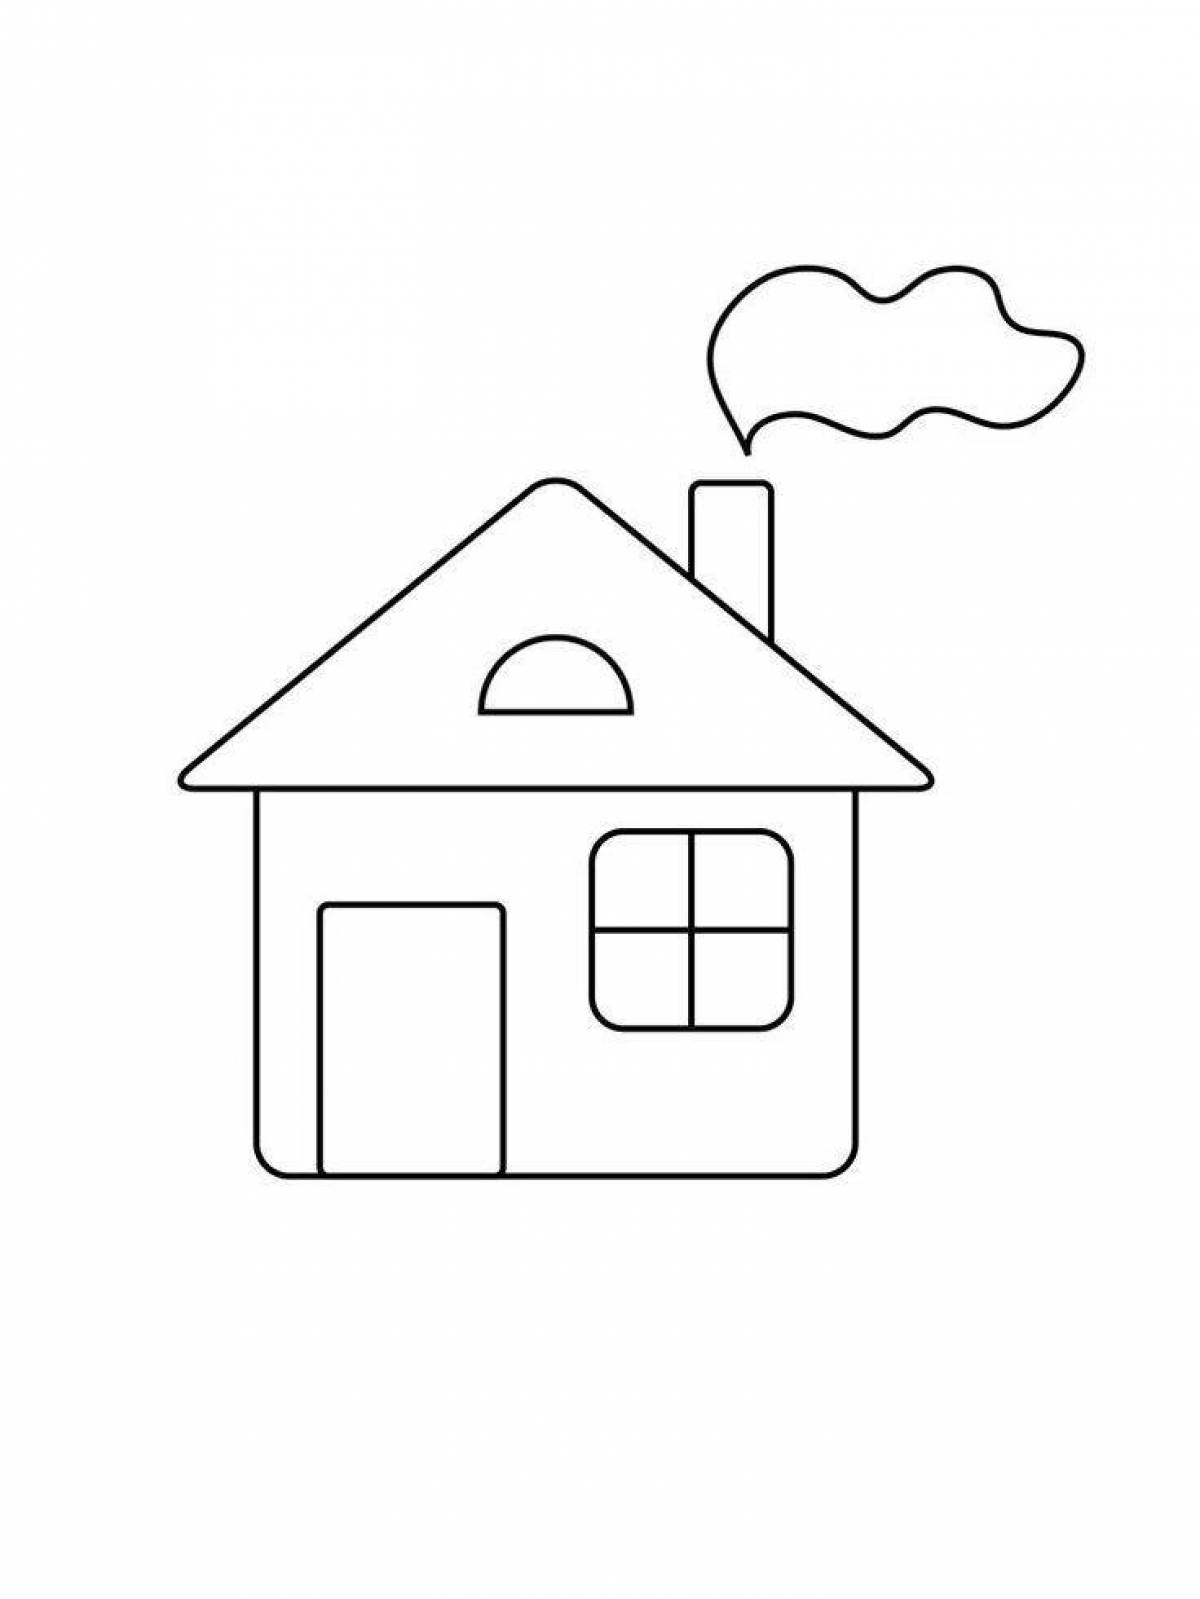 Colored house coloring book for kids